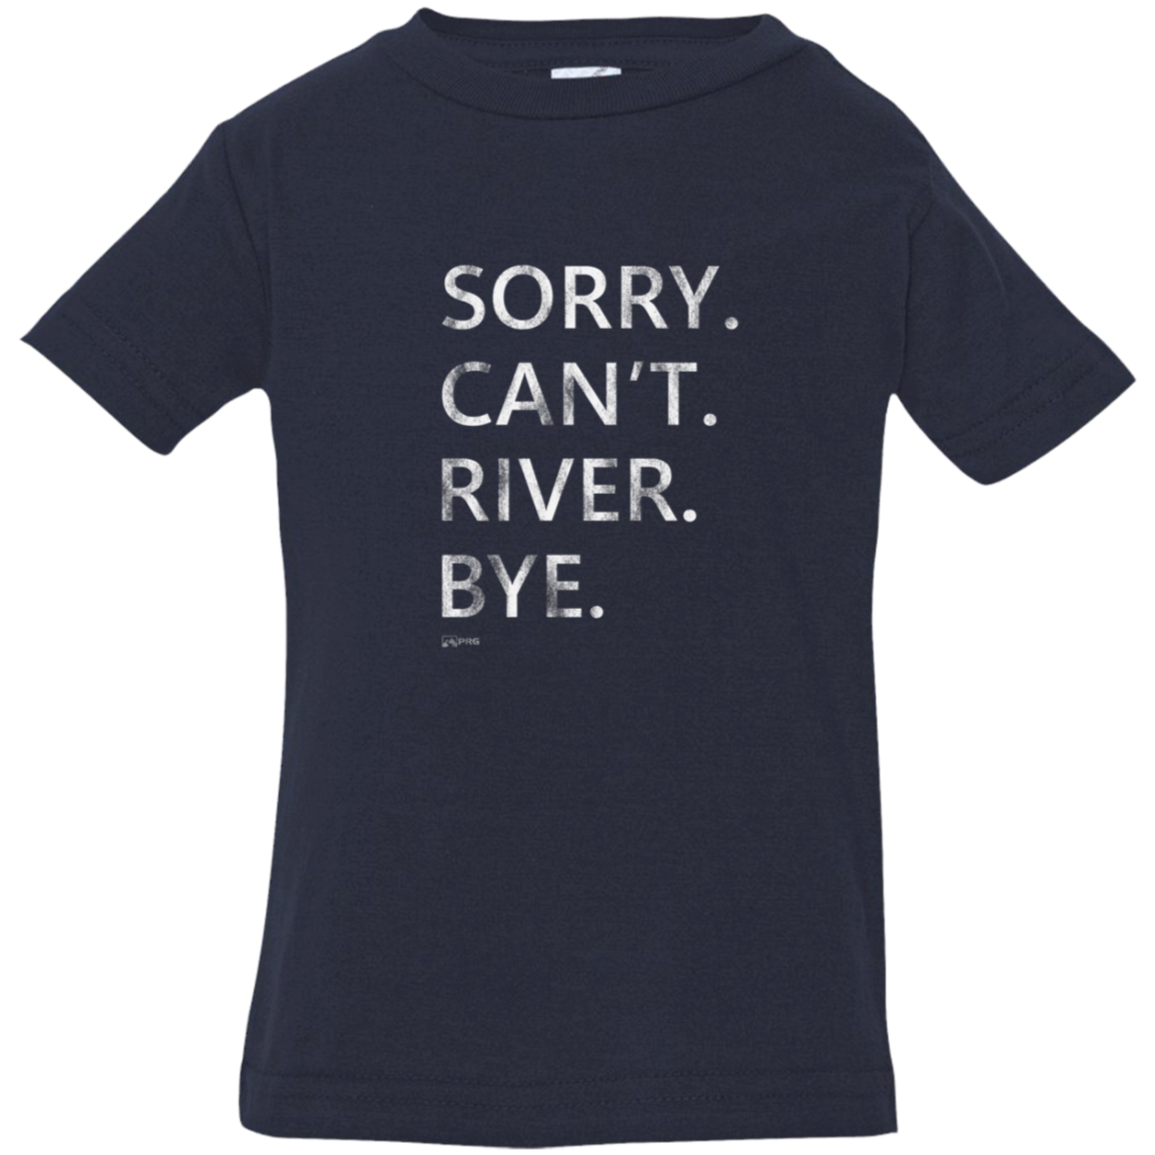 Sorry. Can't. River. Bye. - Infant Shirt